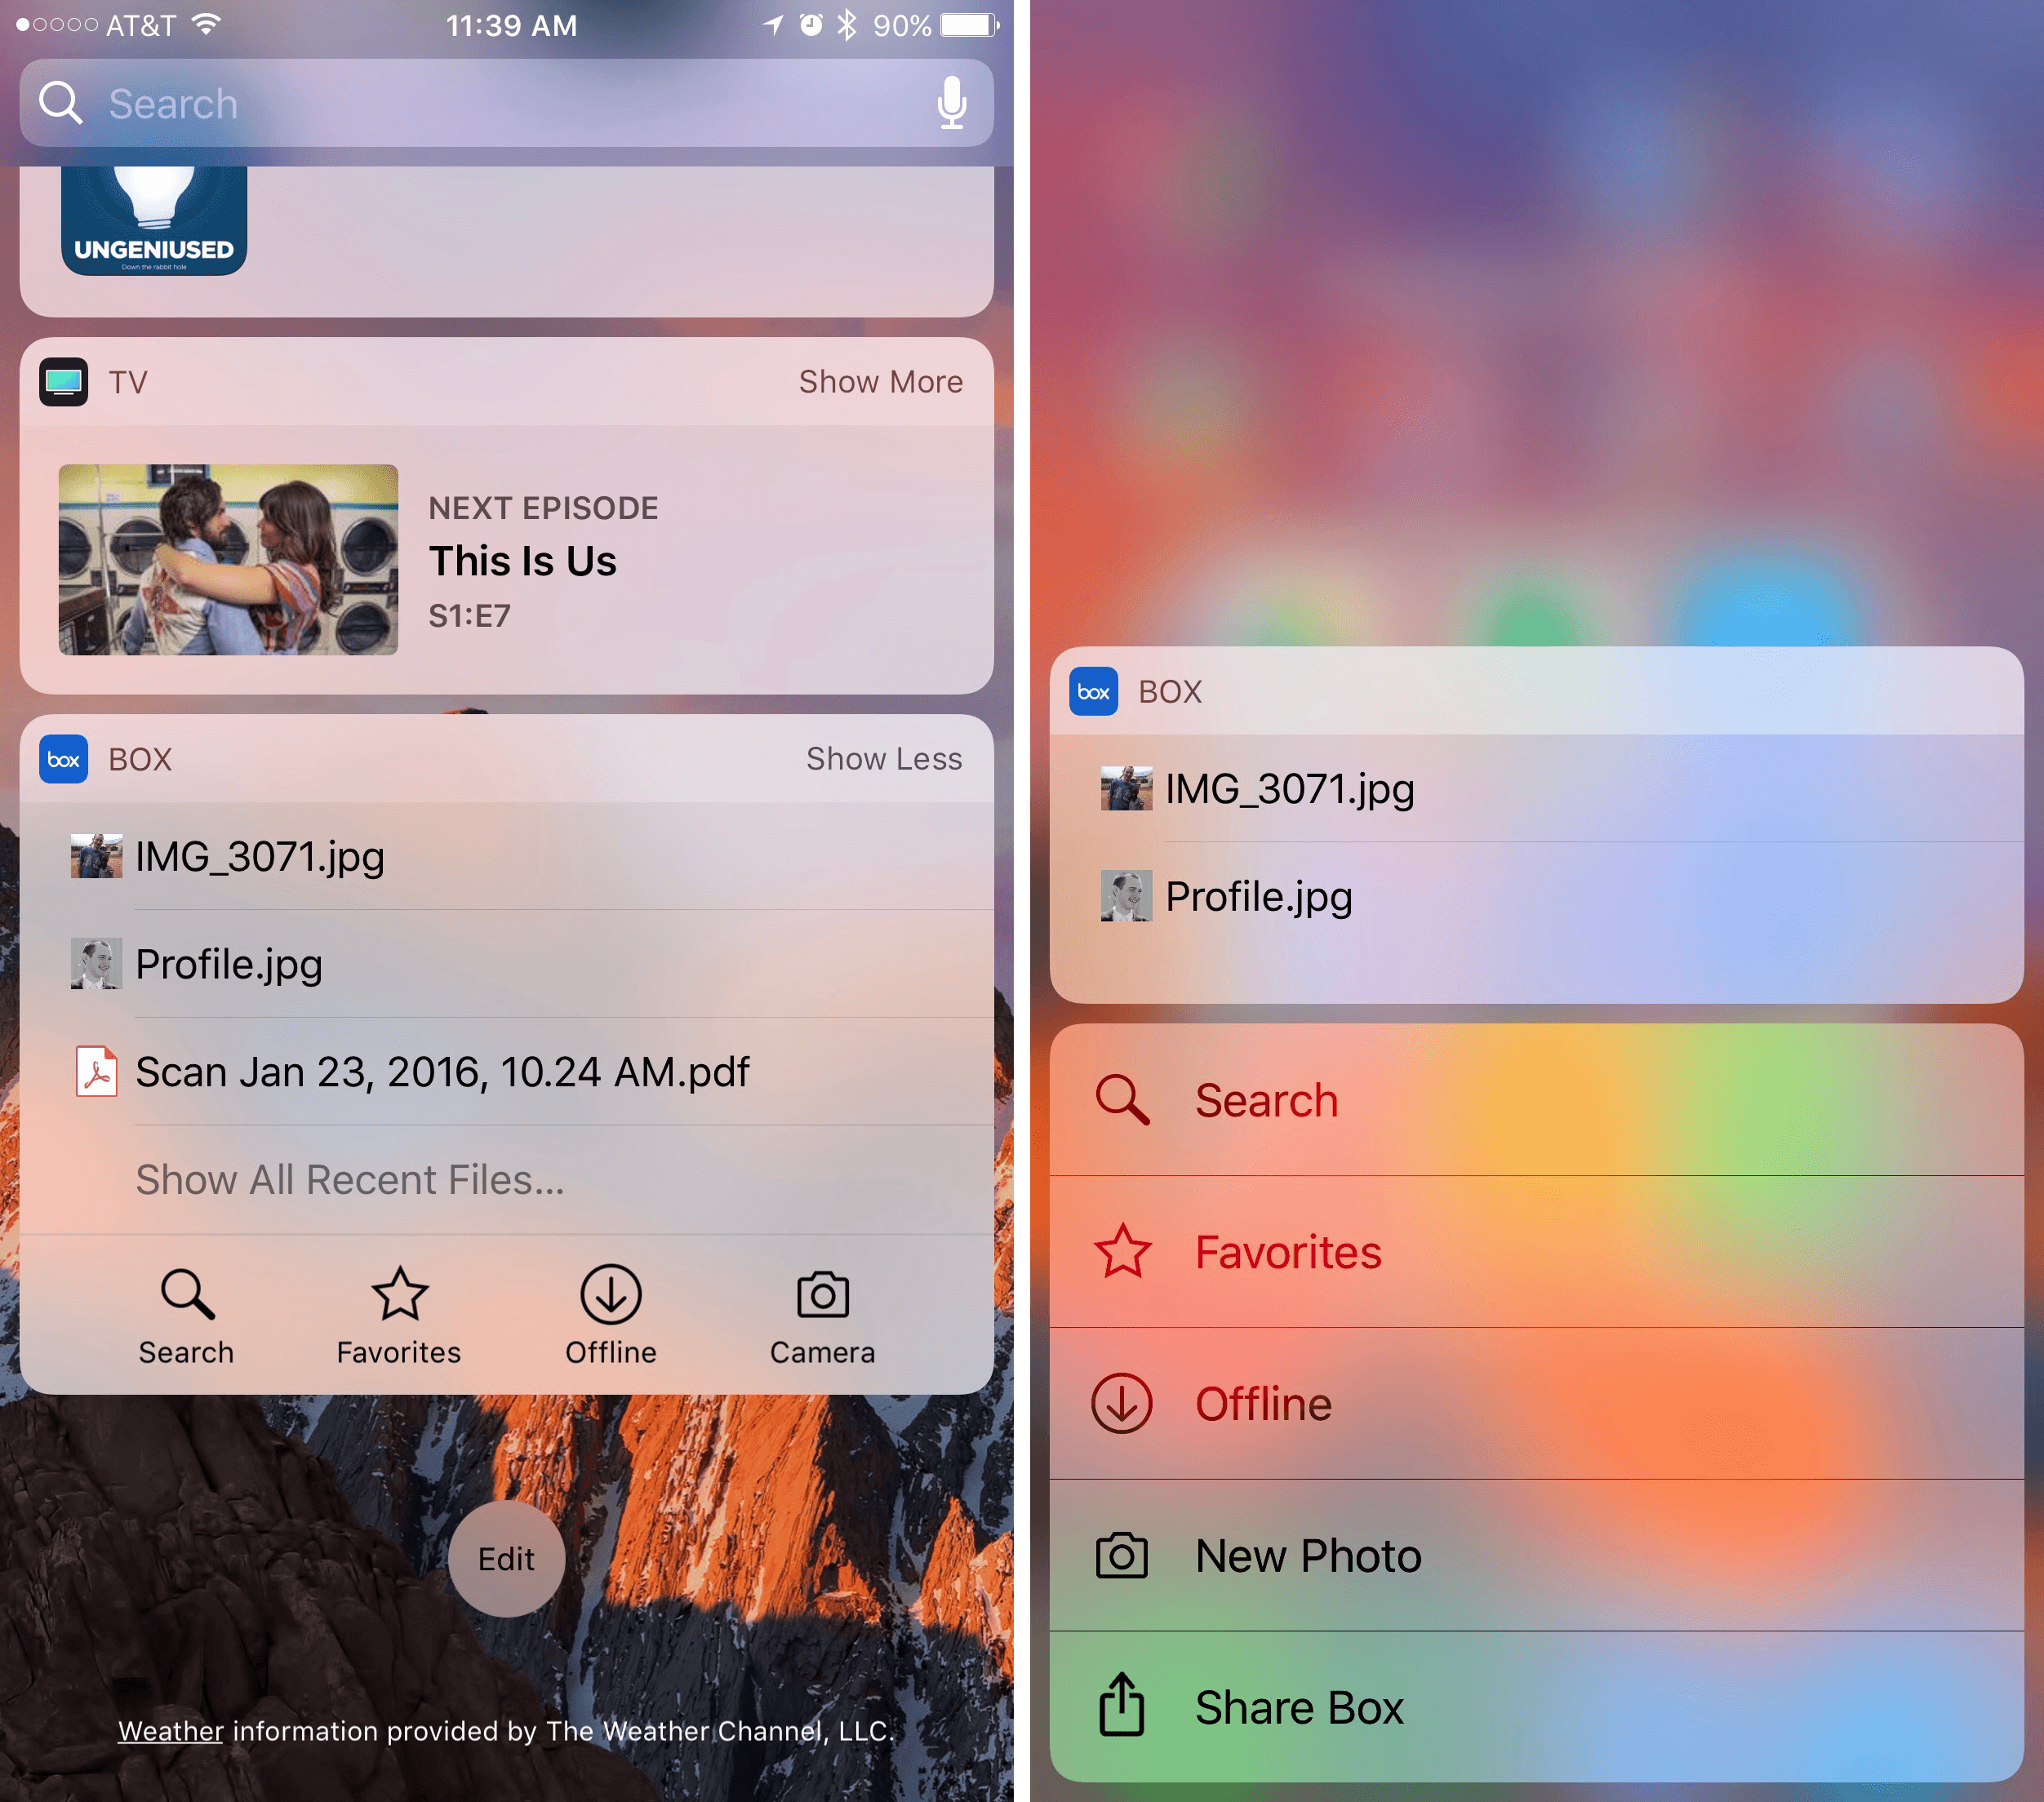 Quickly accessing files can also happen through Box's widget